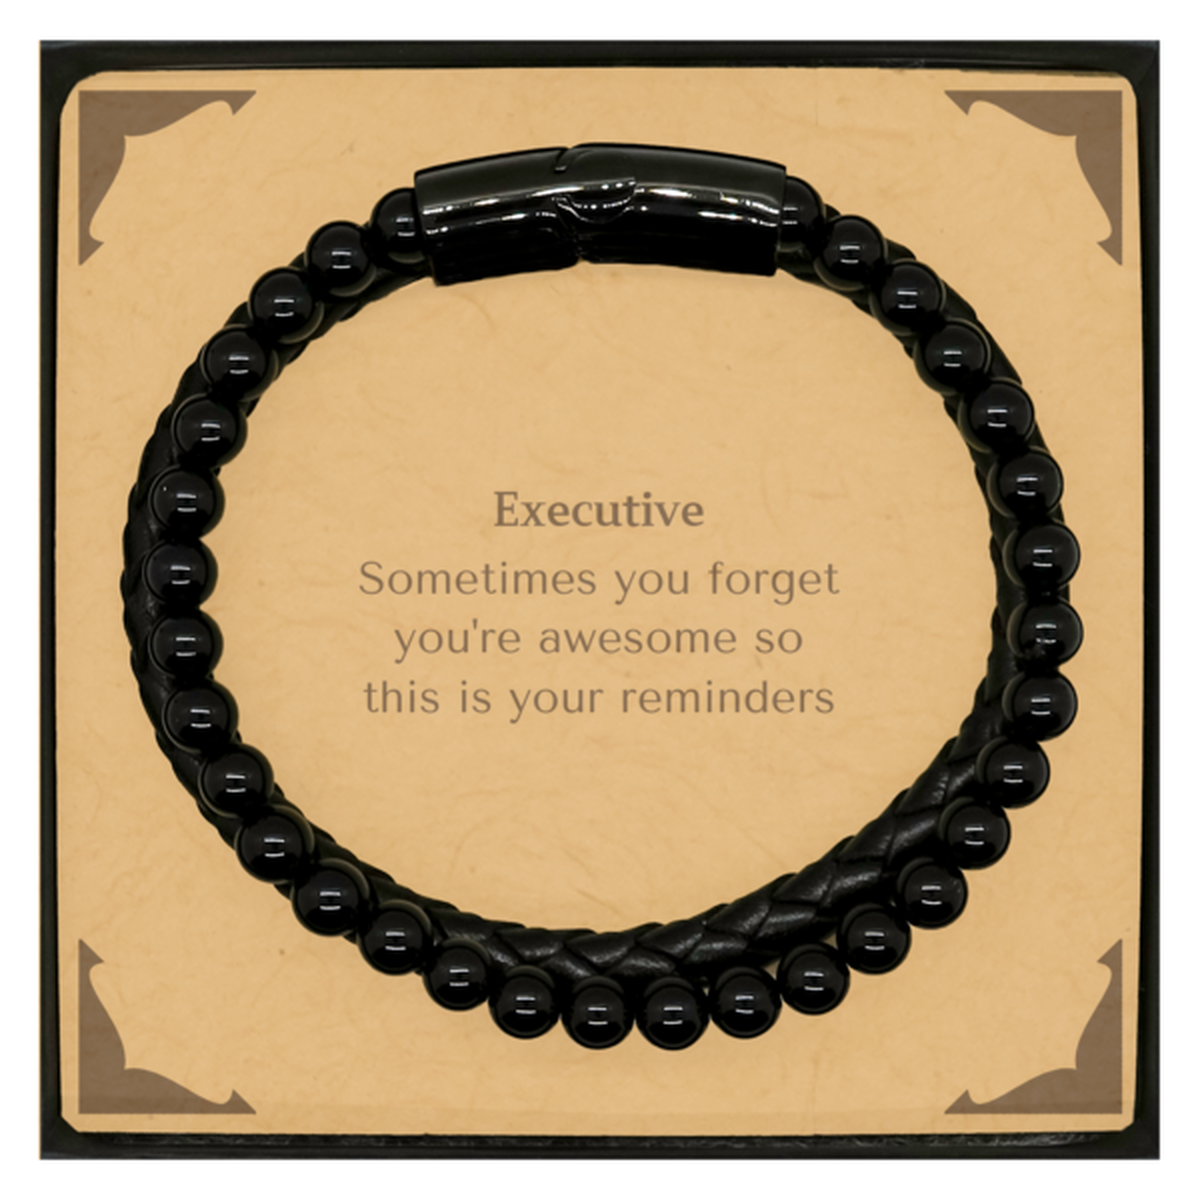 Sentimental Executive Stone Leather Bracelets, Executive Sometimes you forget you're awesome so this is your reminders, Graduation Christmas Birthday Gifts for Executive, Men, Women, Coworkers